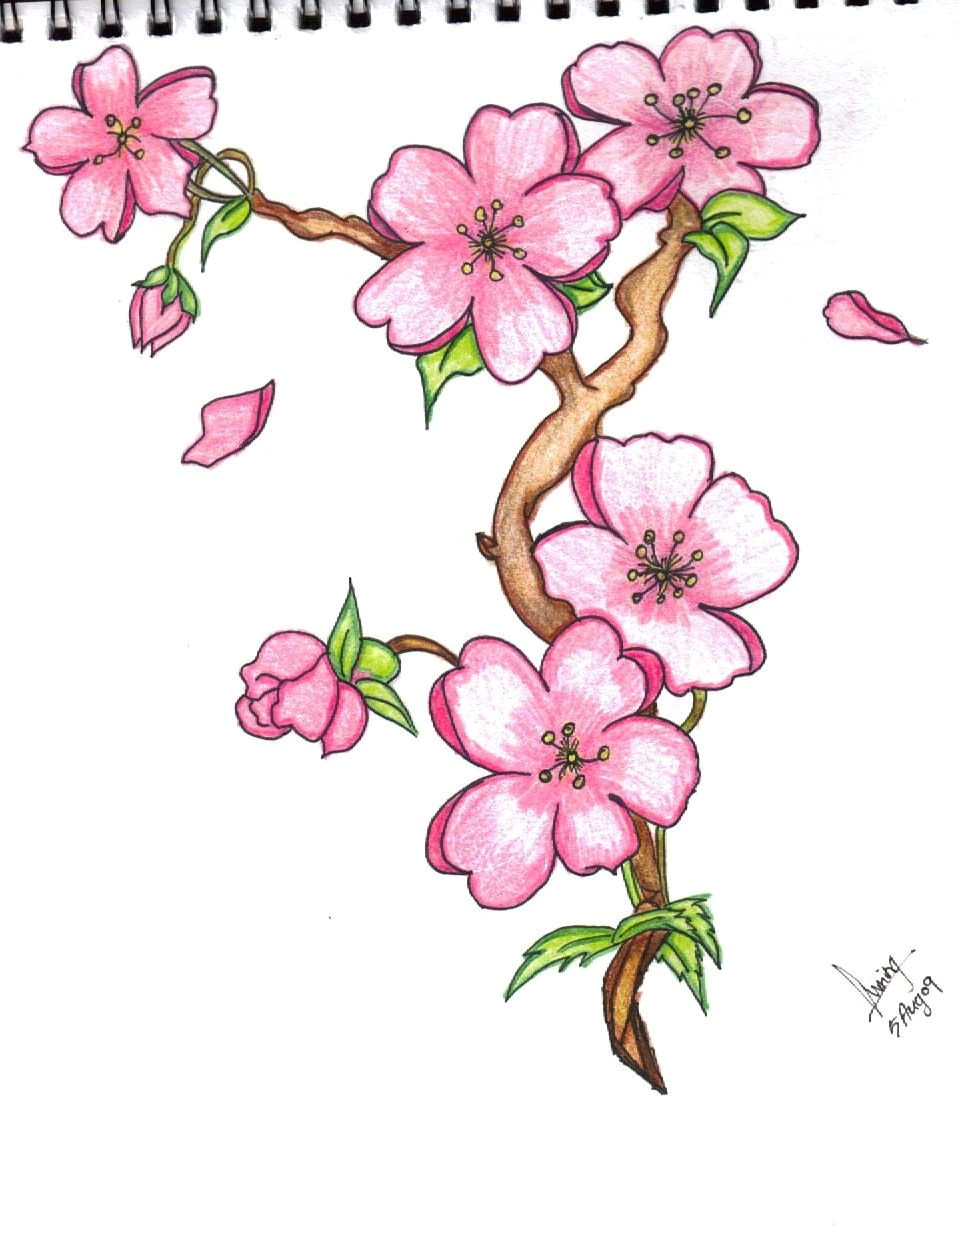 Drawing Flowers Trees Pin by Marvin todd On Drawing Flowers In 2019 Pinterest Drawings